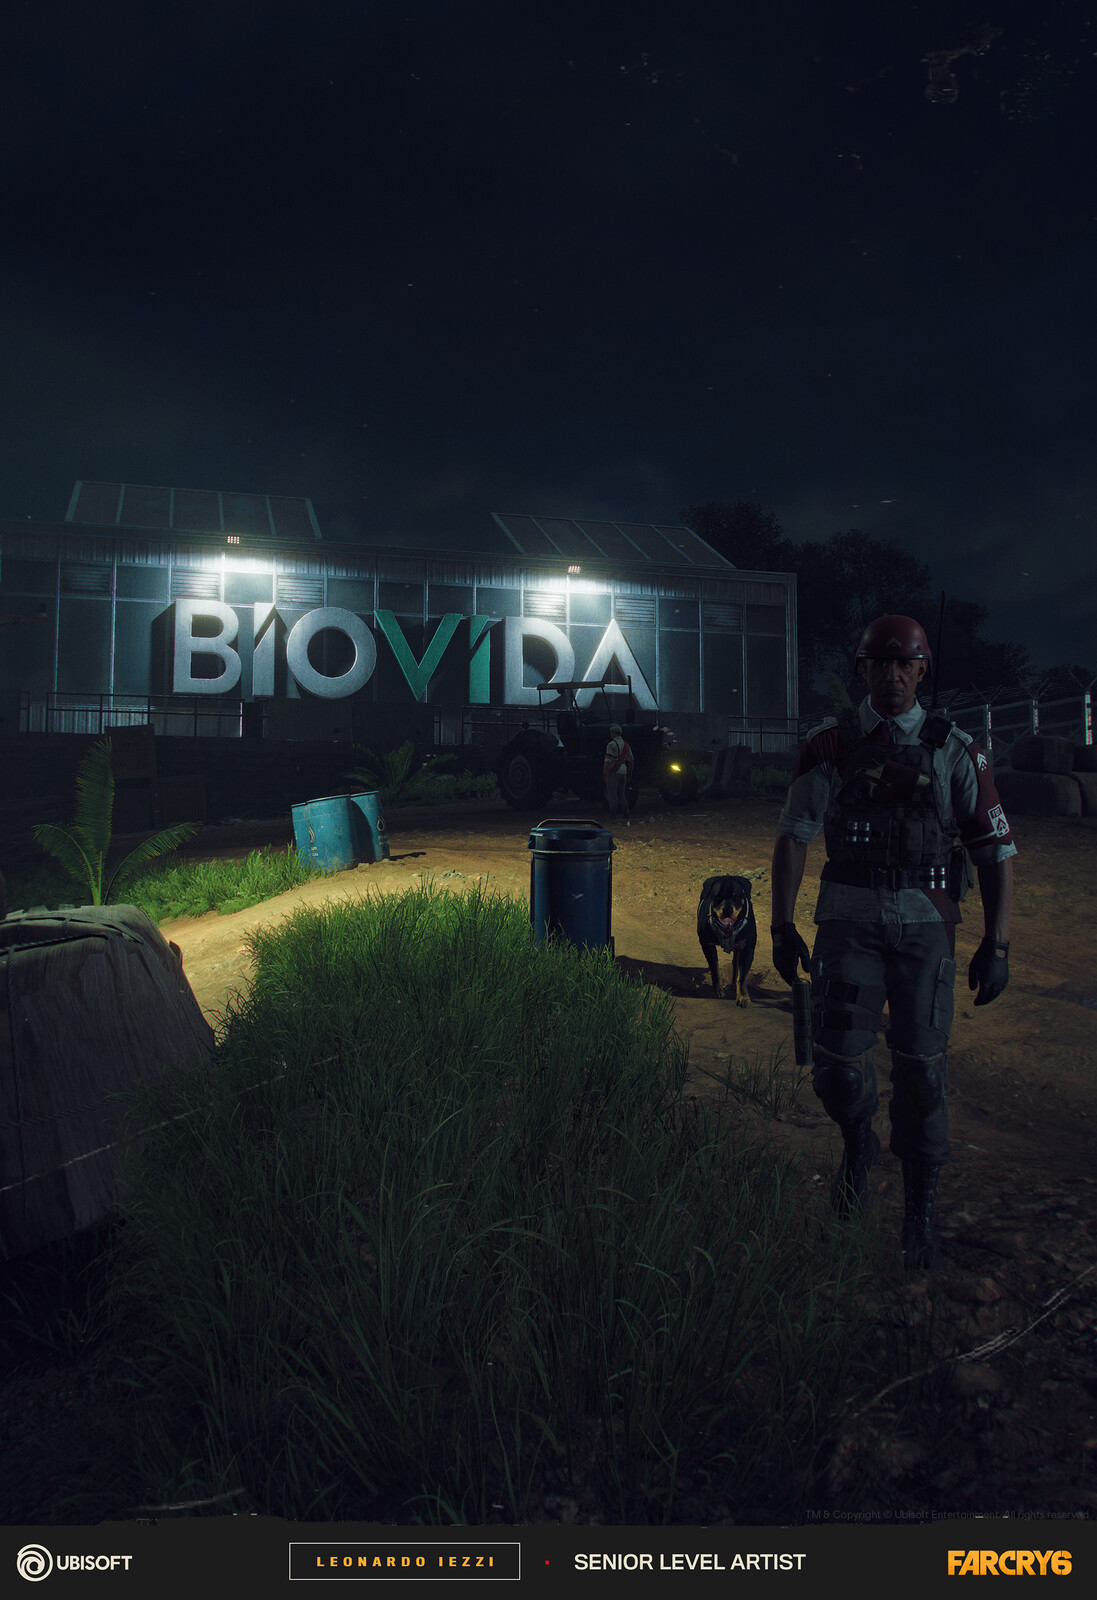 Guards with dogs approaching in the Biovida farm